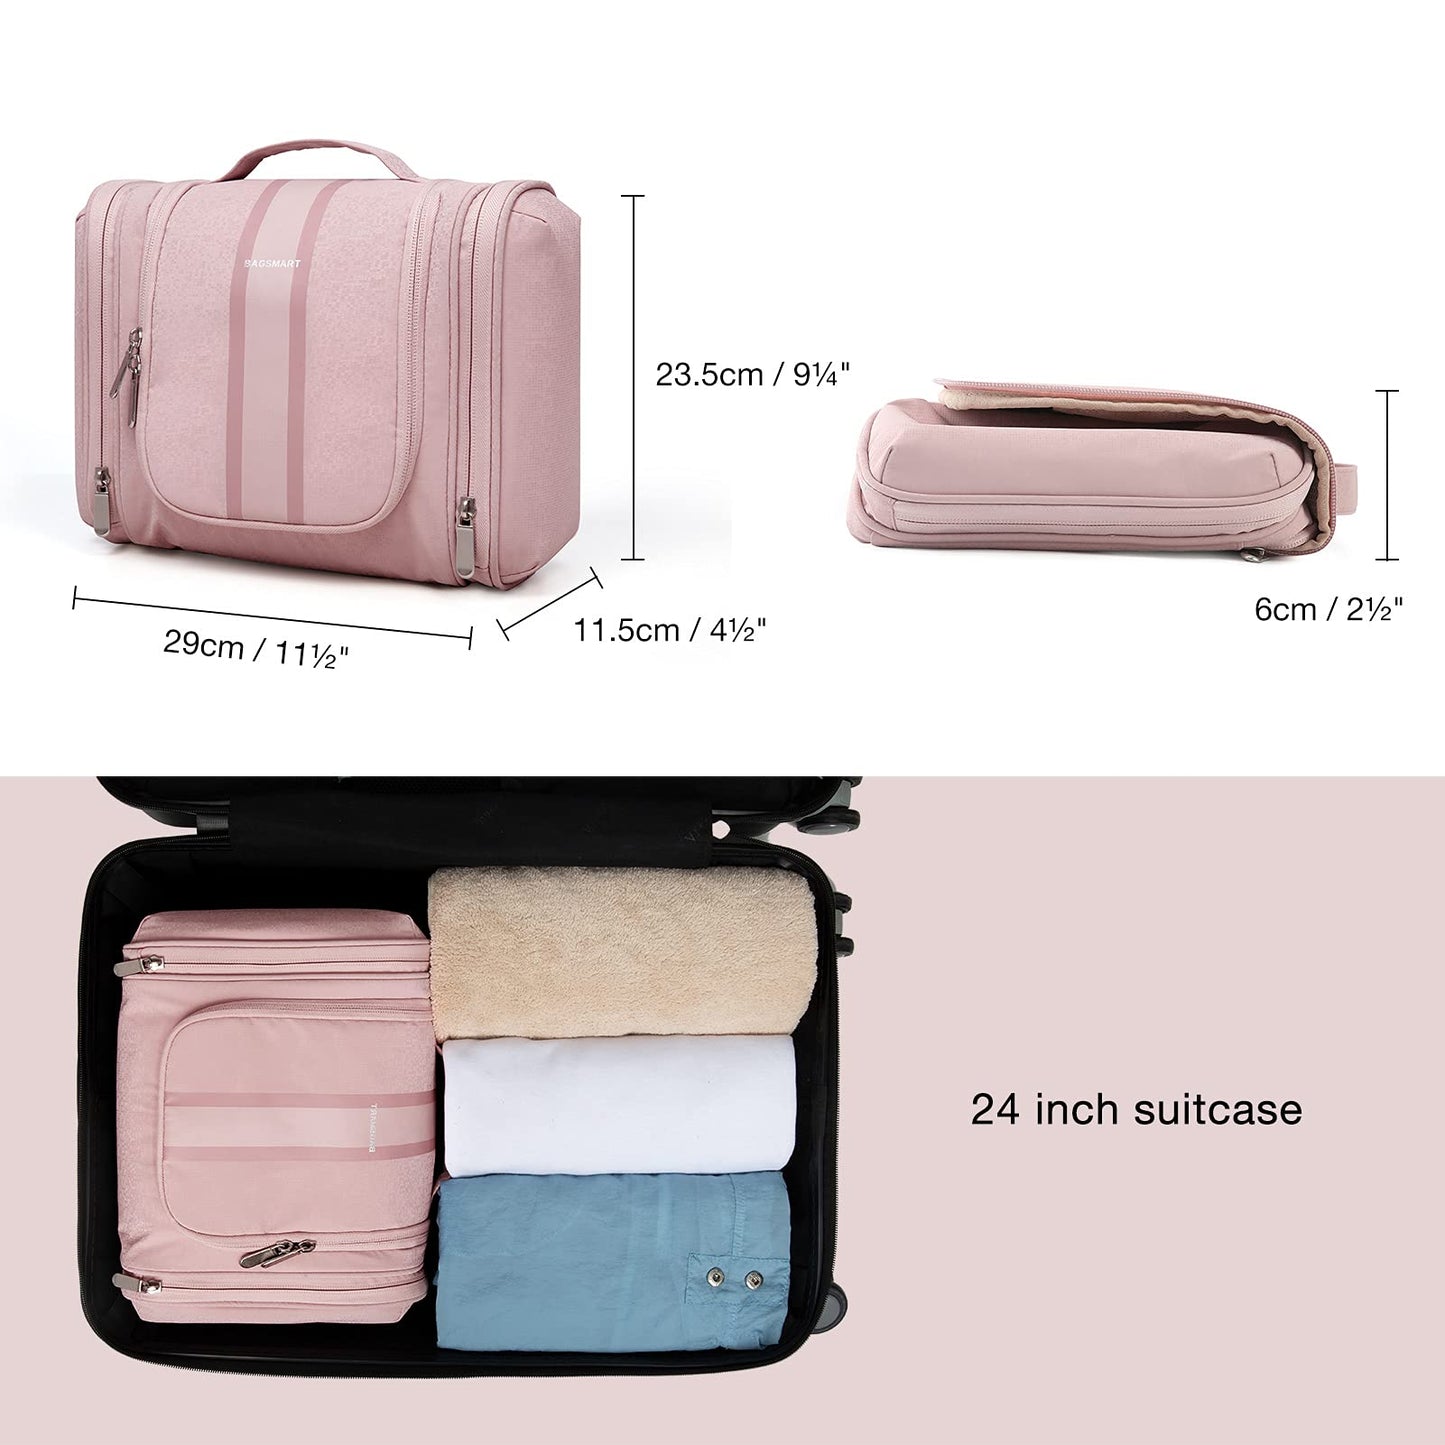 Toiletry Bag for Women, Travel Toiletry Organizer with hanging hook, Water-resistant Cosmetic Makeup Bag Travel Organizer for Shampoo, Full-size Container, Toiletries, Pink-Medium